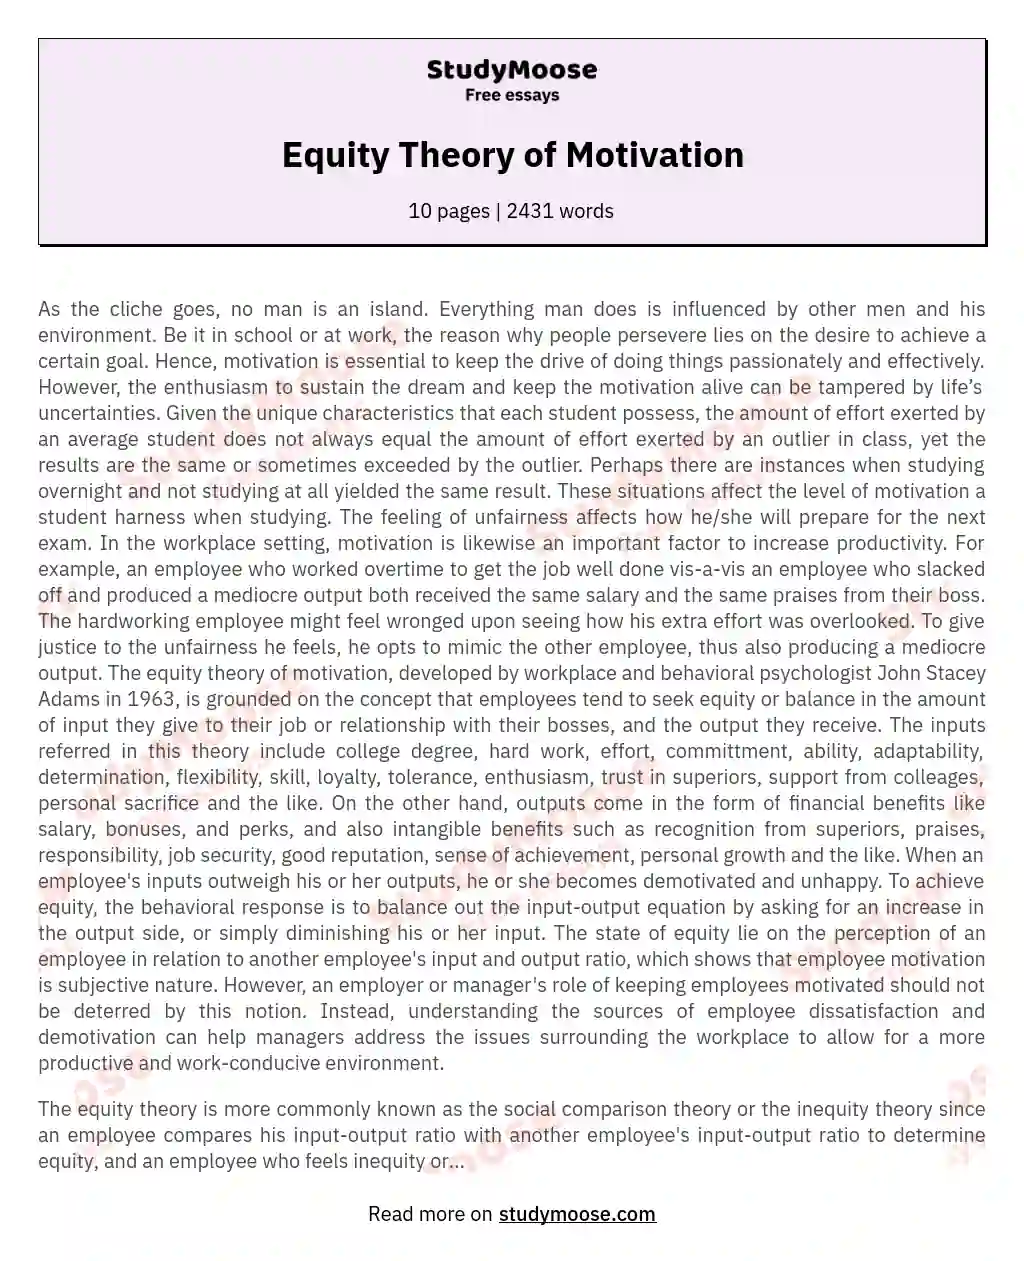 Equity Theory of Motivation essay